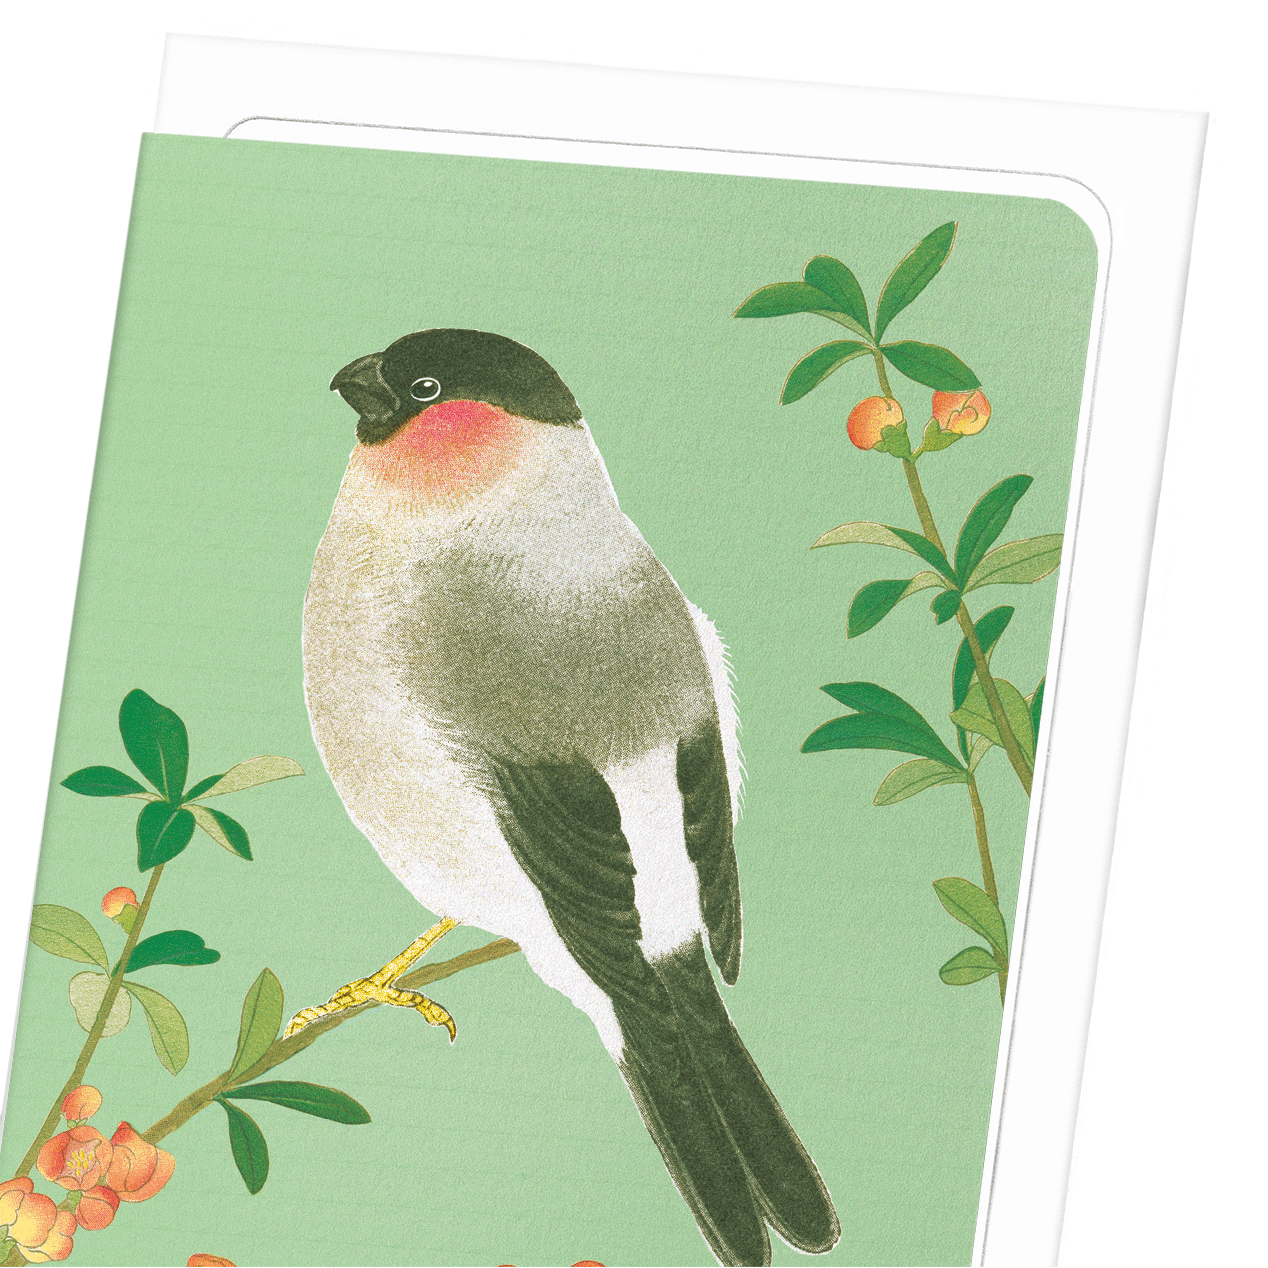 EURASIAN BULLFINCH WITH CHINESE QUINCE (C.1930): Japanese Greeting Card